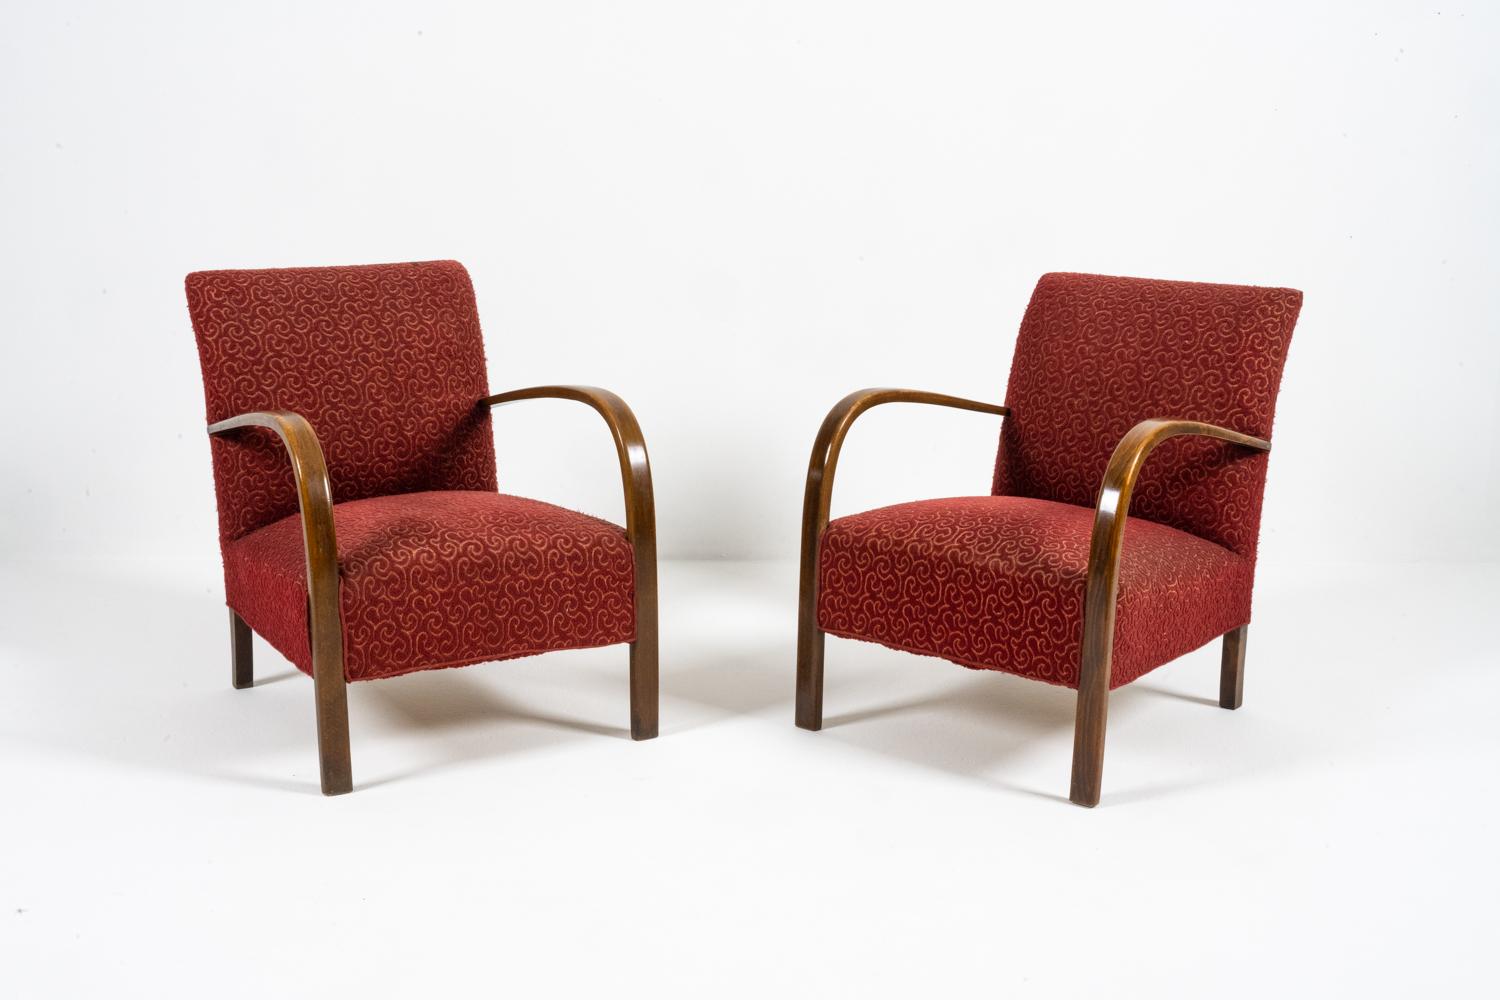 Pair of Danish Modern Lounge Chairs by Fritz Hansen, c. 1950s In Fair Condition For Sale In Norwalk, CT